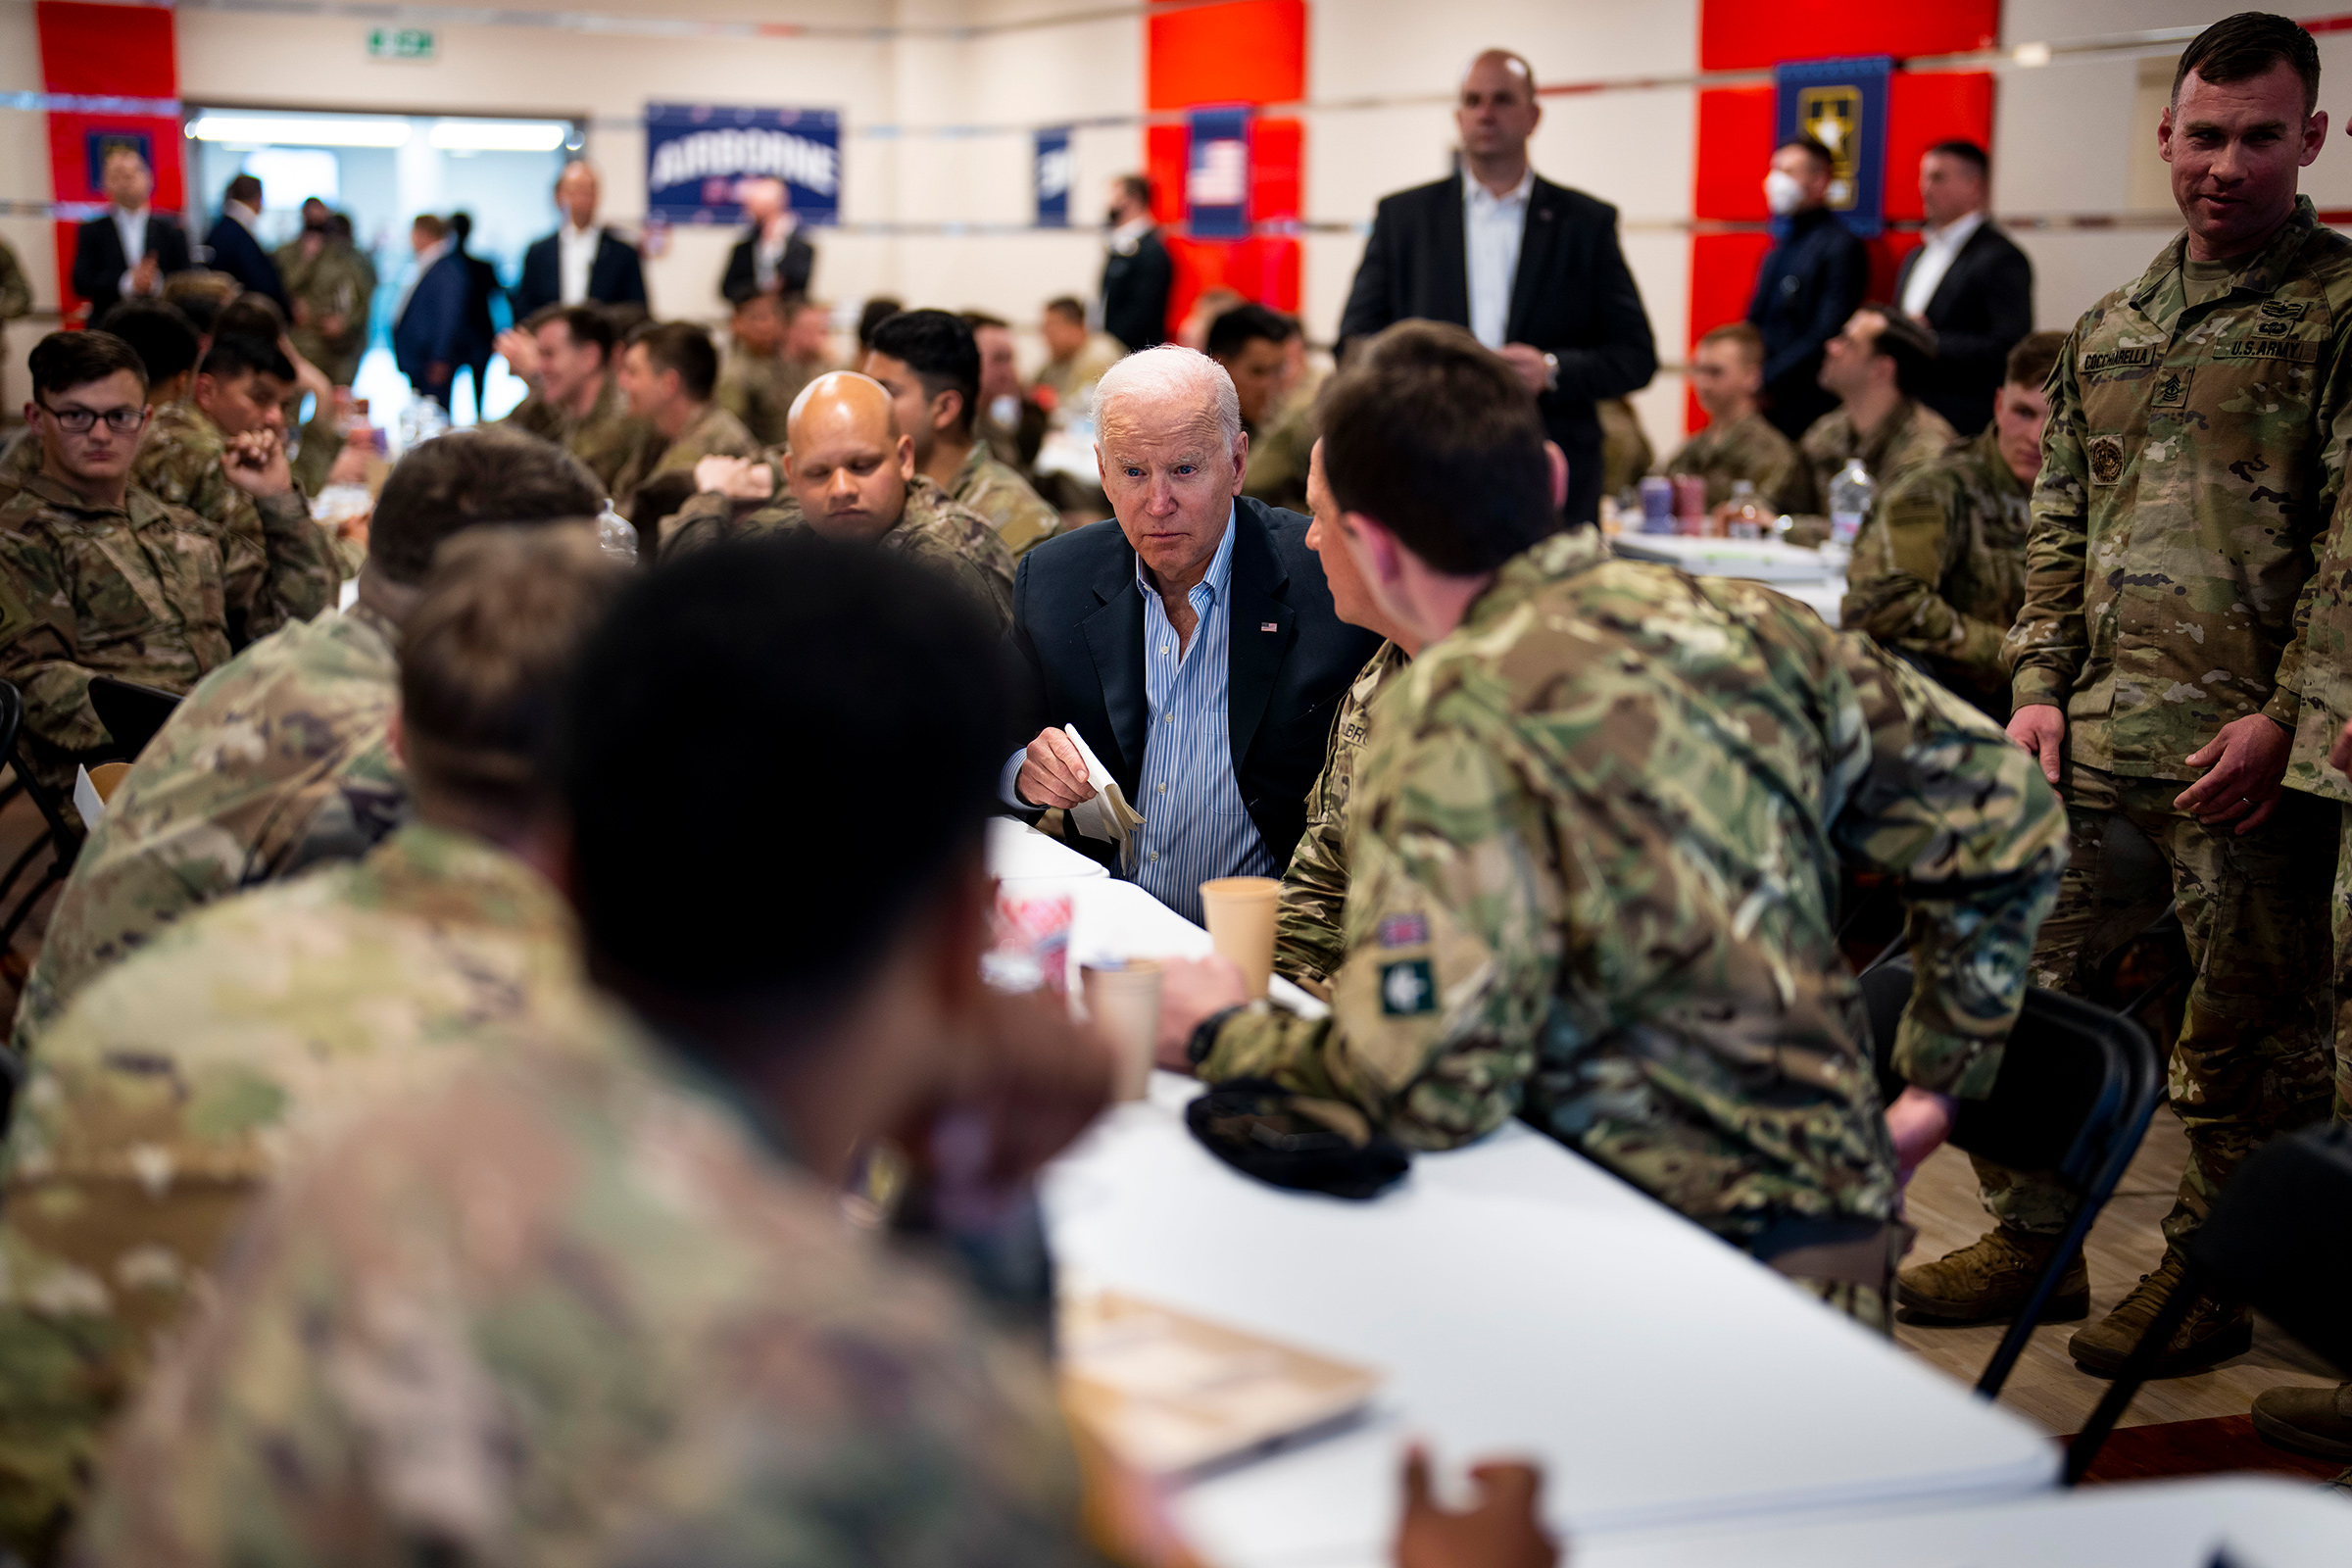 President Biden with members of the 82nd Airborne Division in Poland on March 25